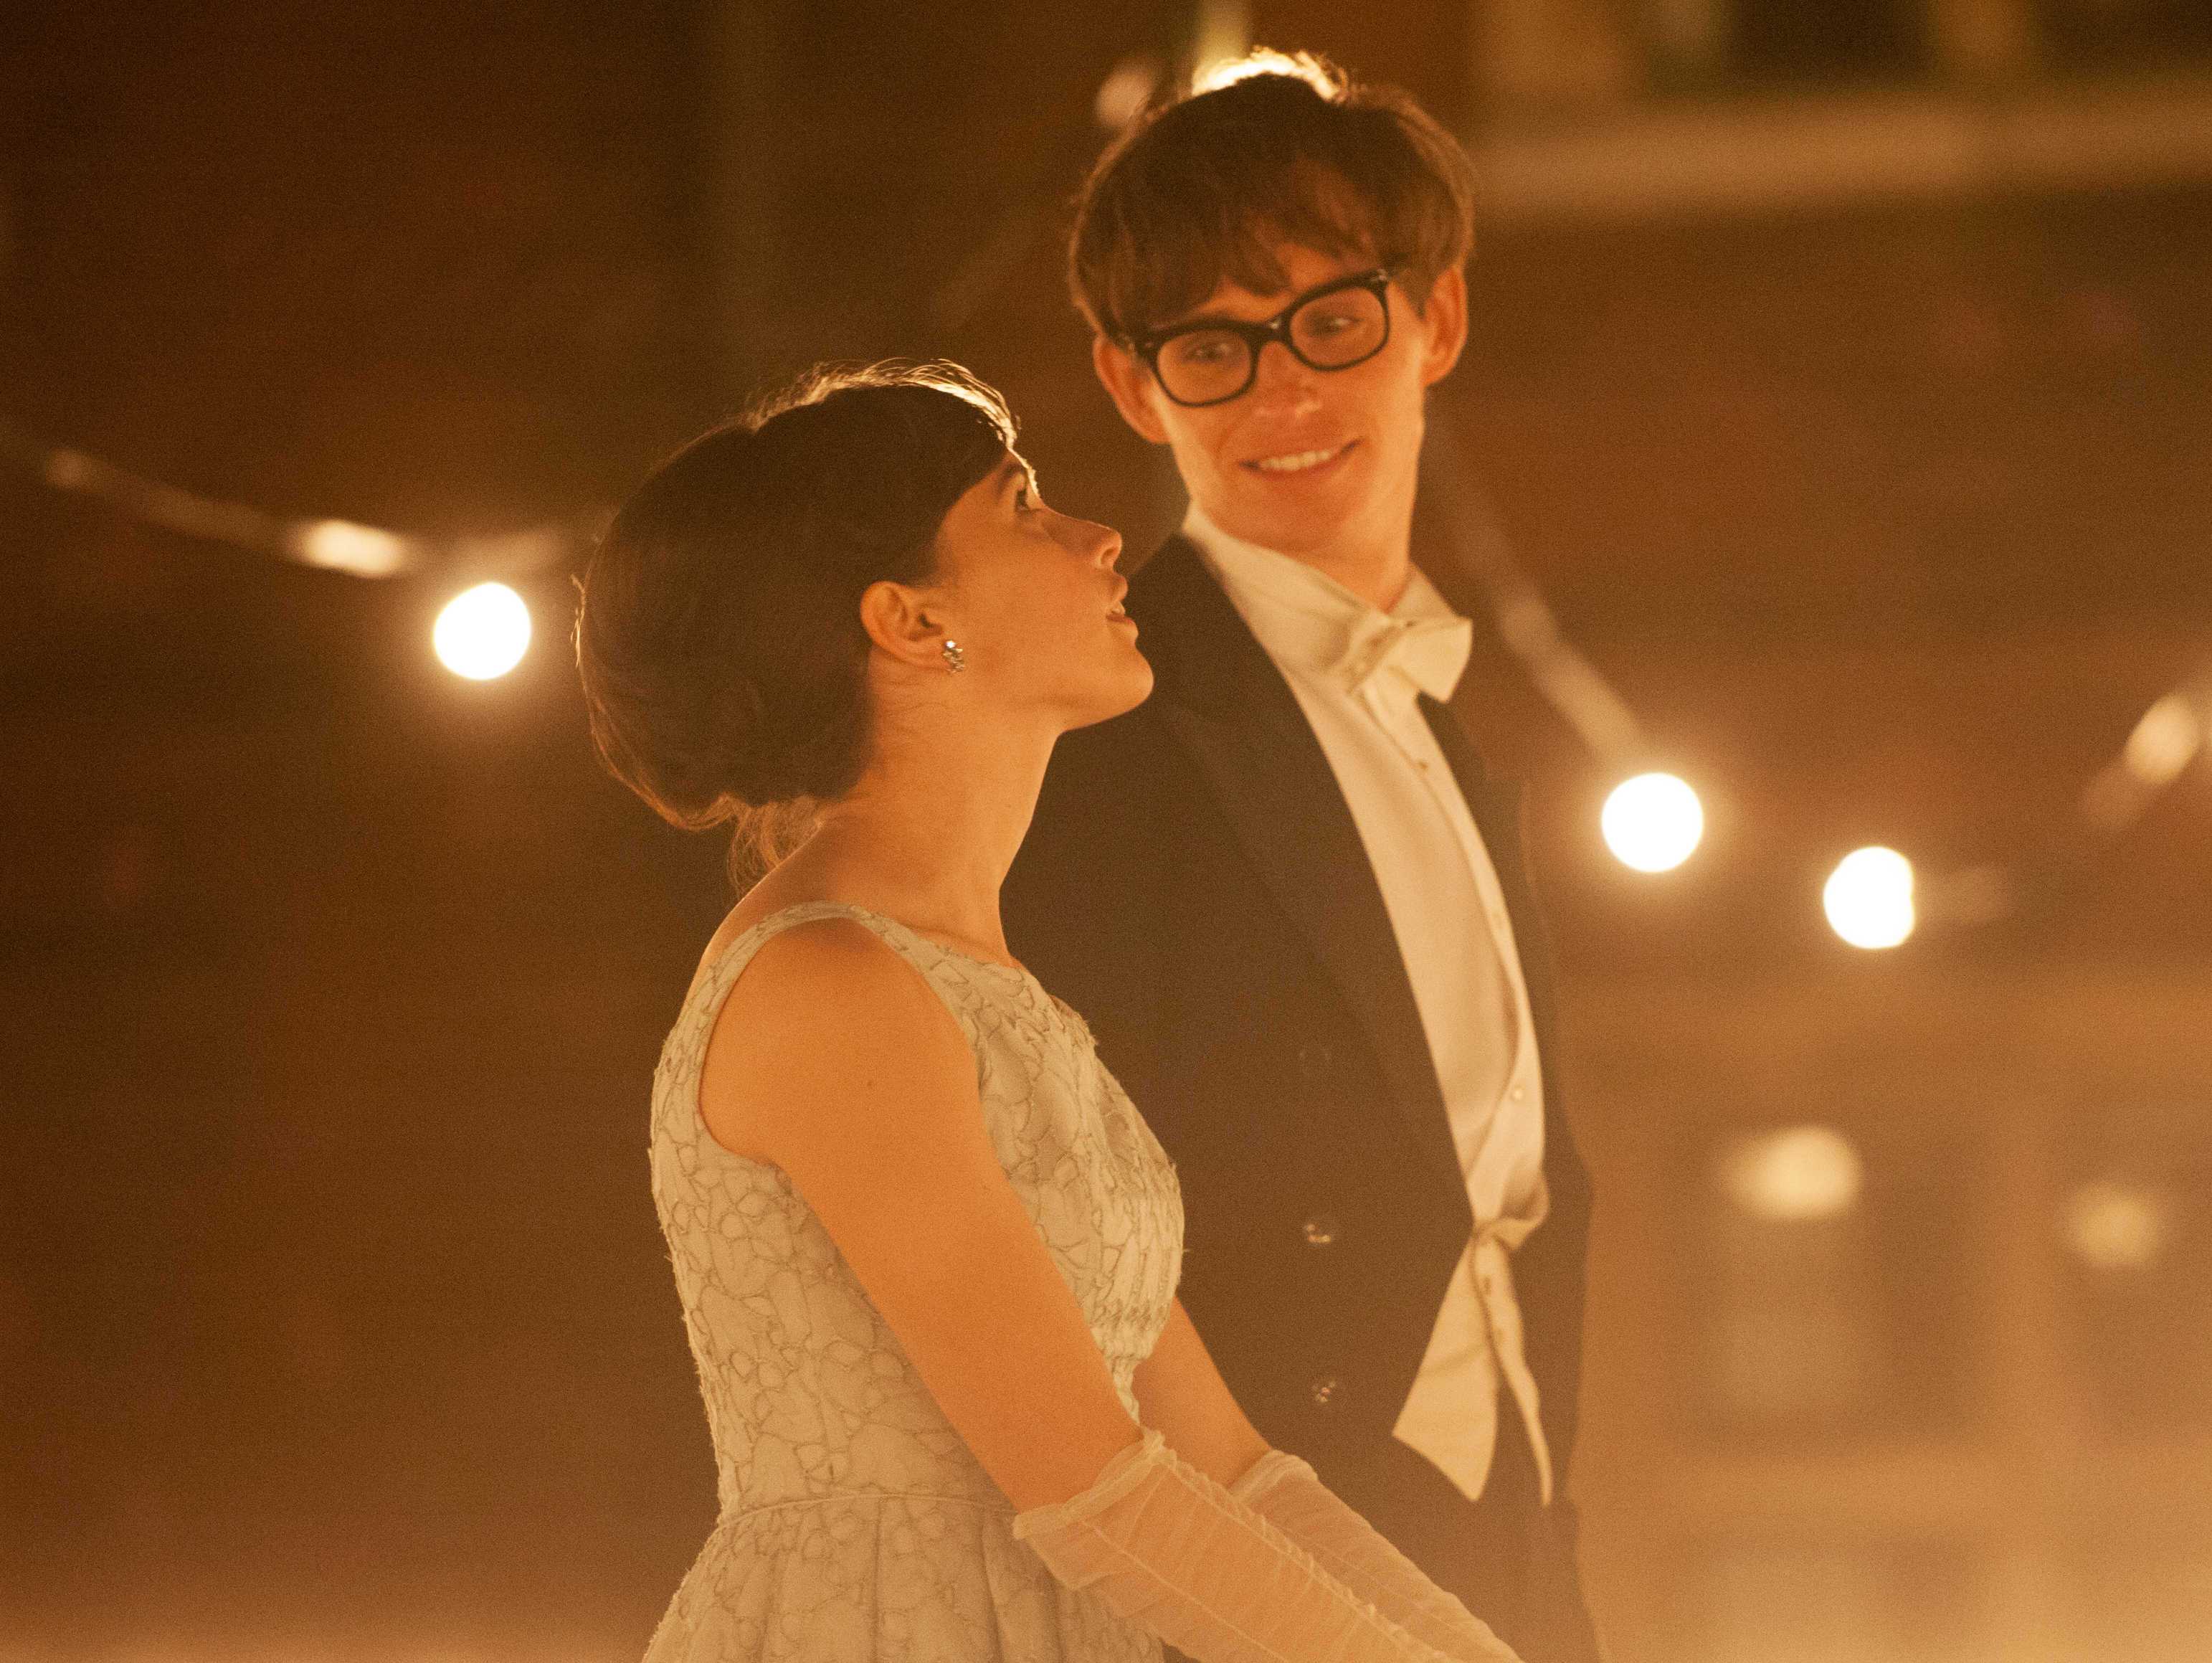 Eddie Redmayne and Felicity Jones play a real-life star-crossed couple. Photo used with permission from Focus Features.